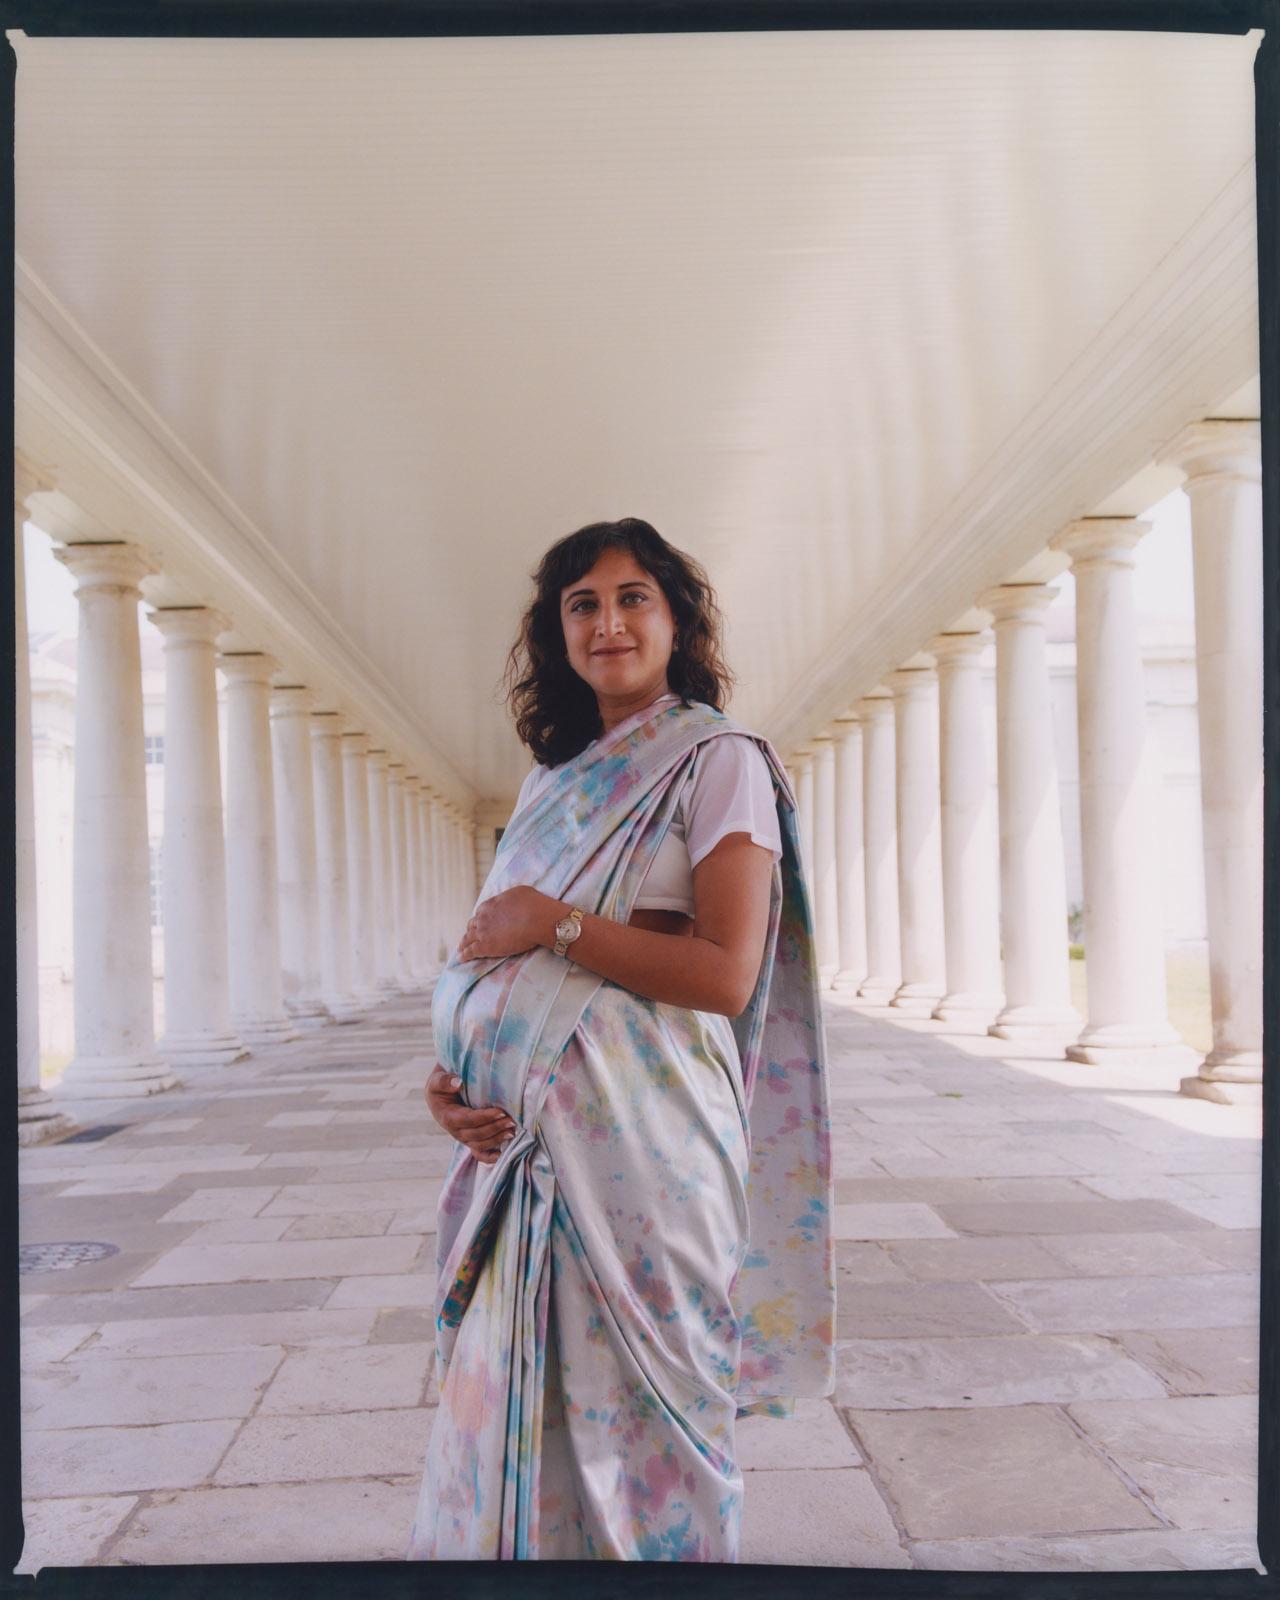 Portrait photograph of a pregnant woman wearing a white sari with light speckled pattern. She is standing right in the centre of a series of colonnades, perfectly framed by the white pillars on either side